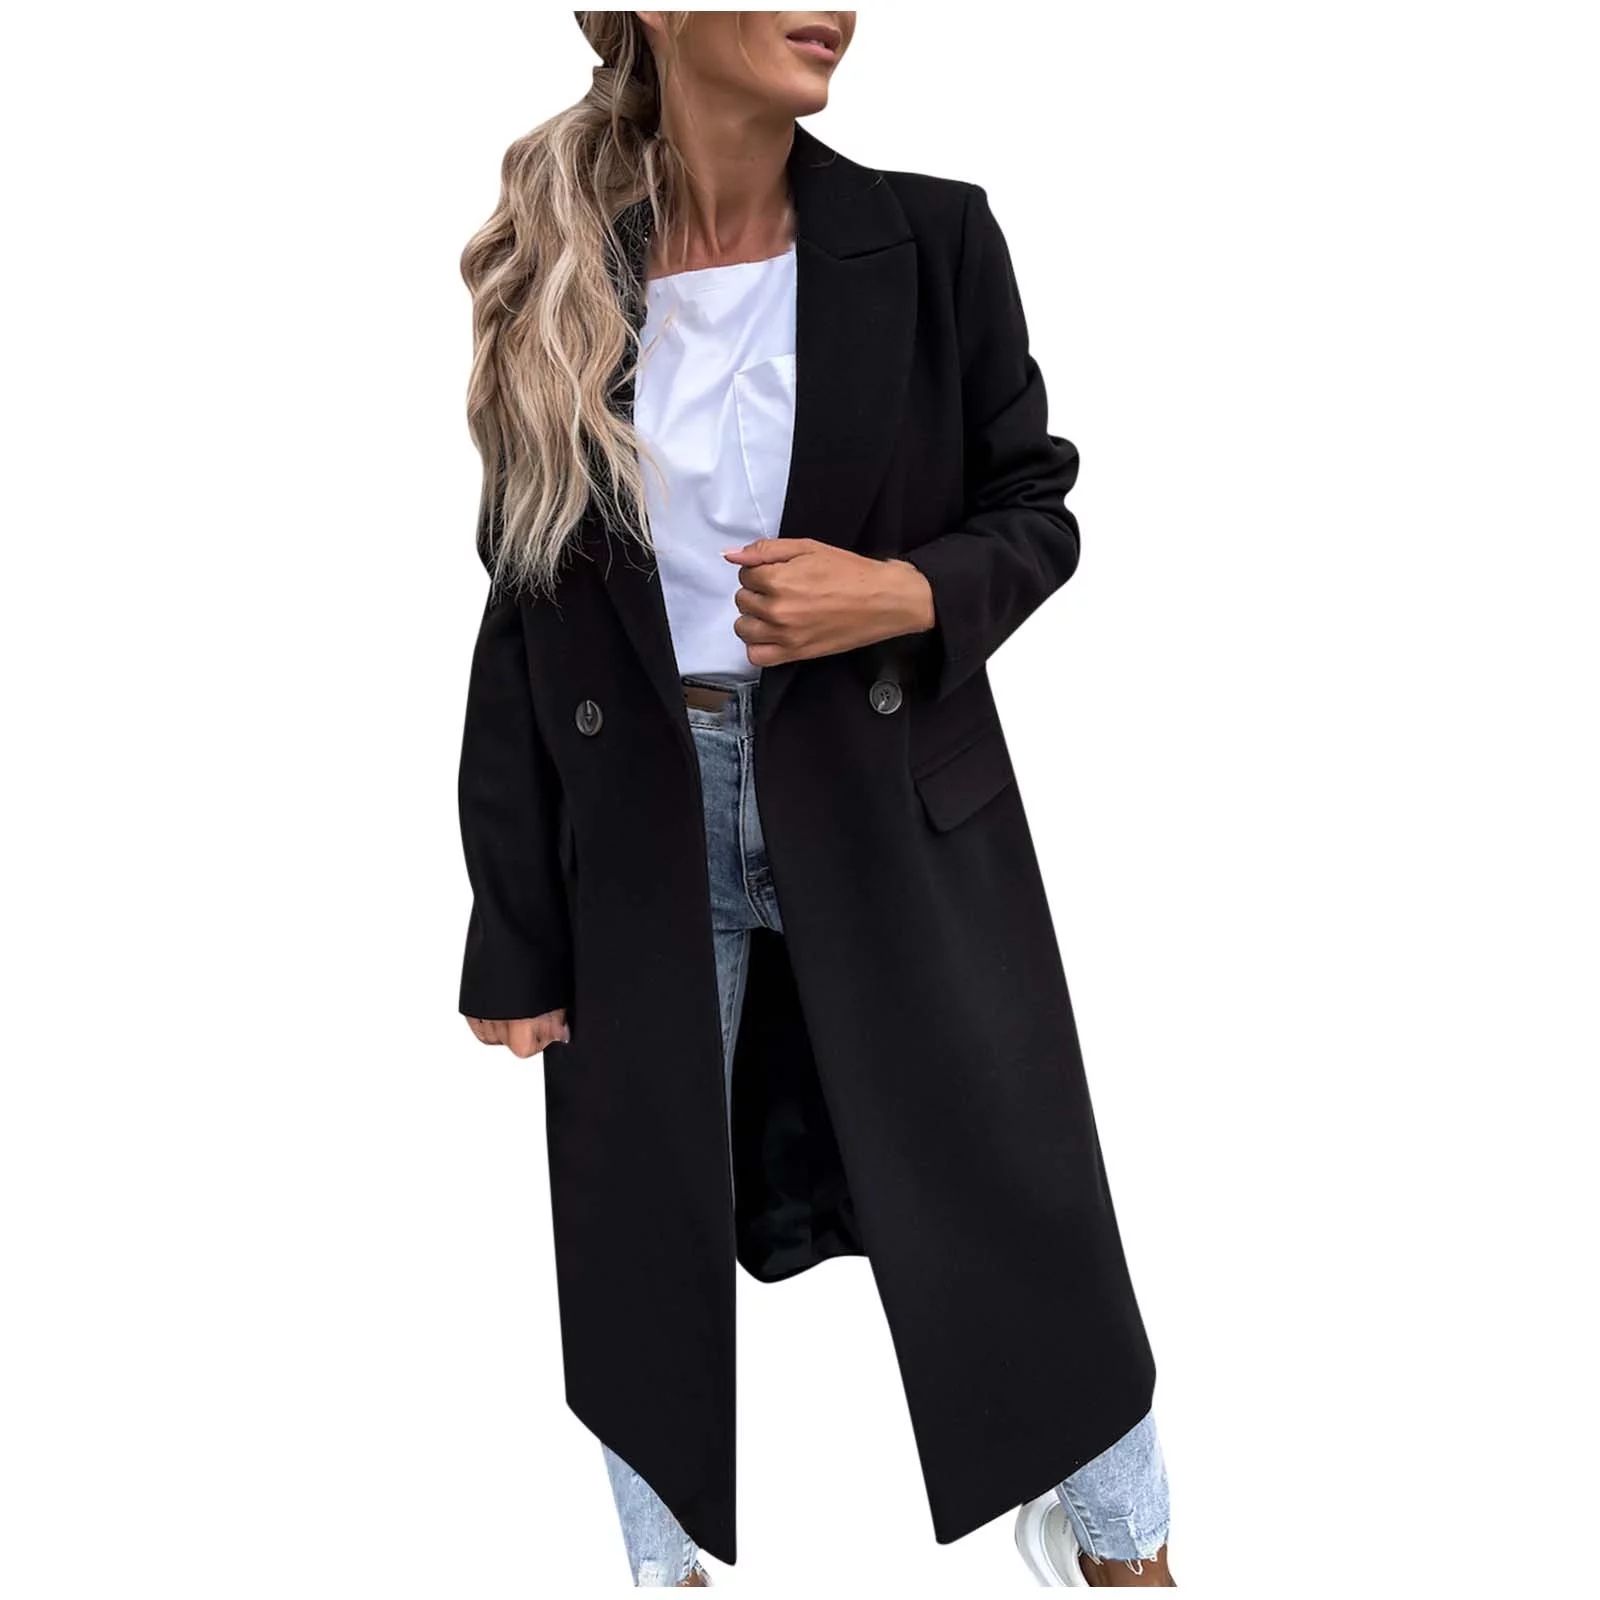 Hfyihgf Women's Elegant Trench Coat Notched Lapel Double Breasted Wool Blend Mid Long Peacoat Ove... | Walmart (US)